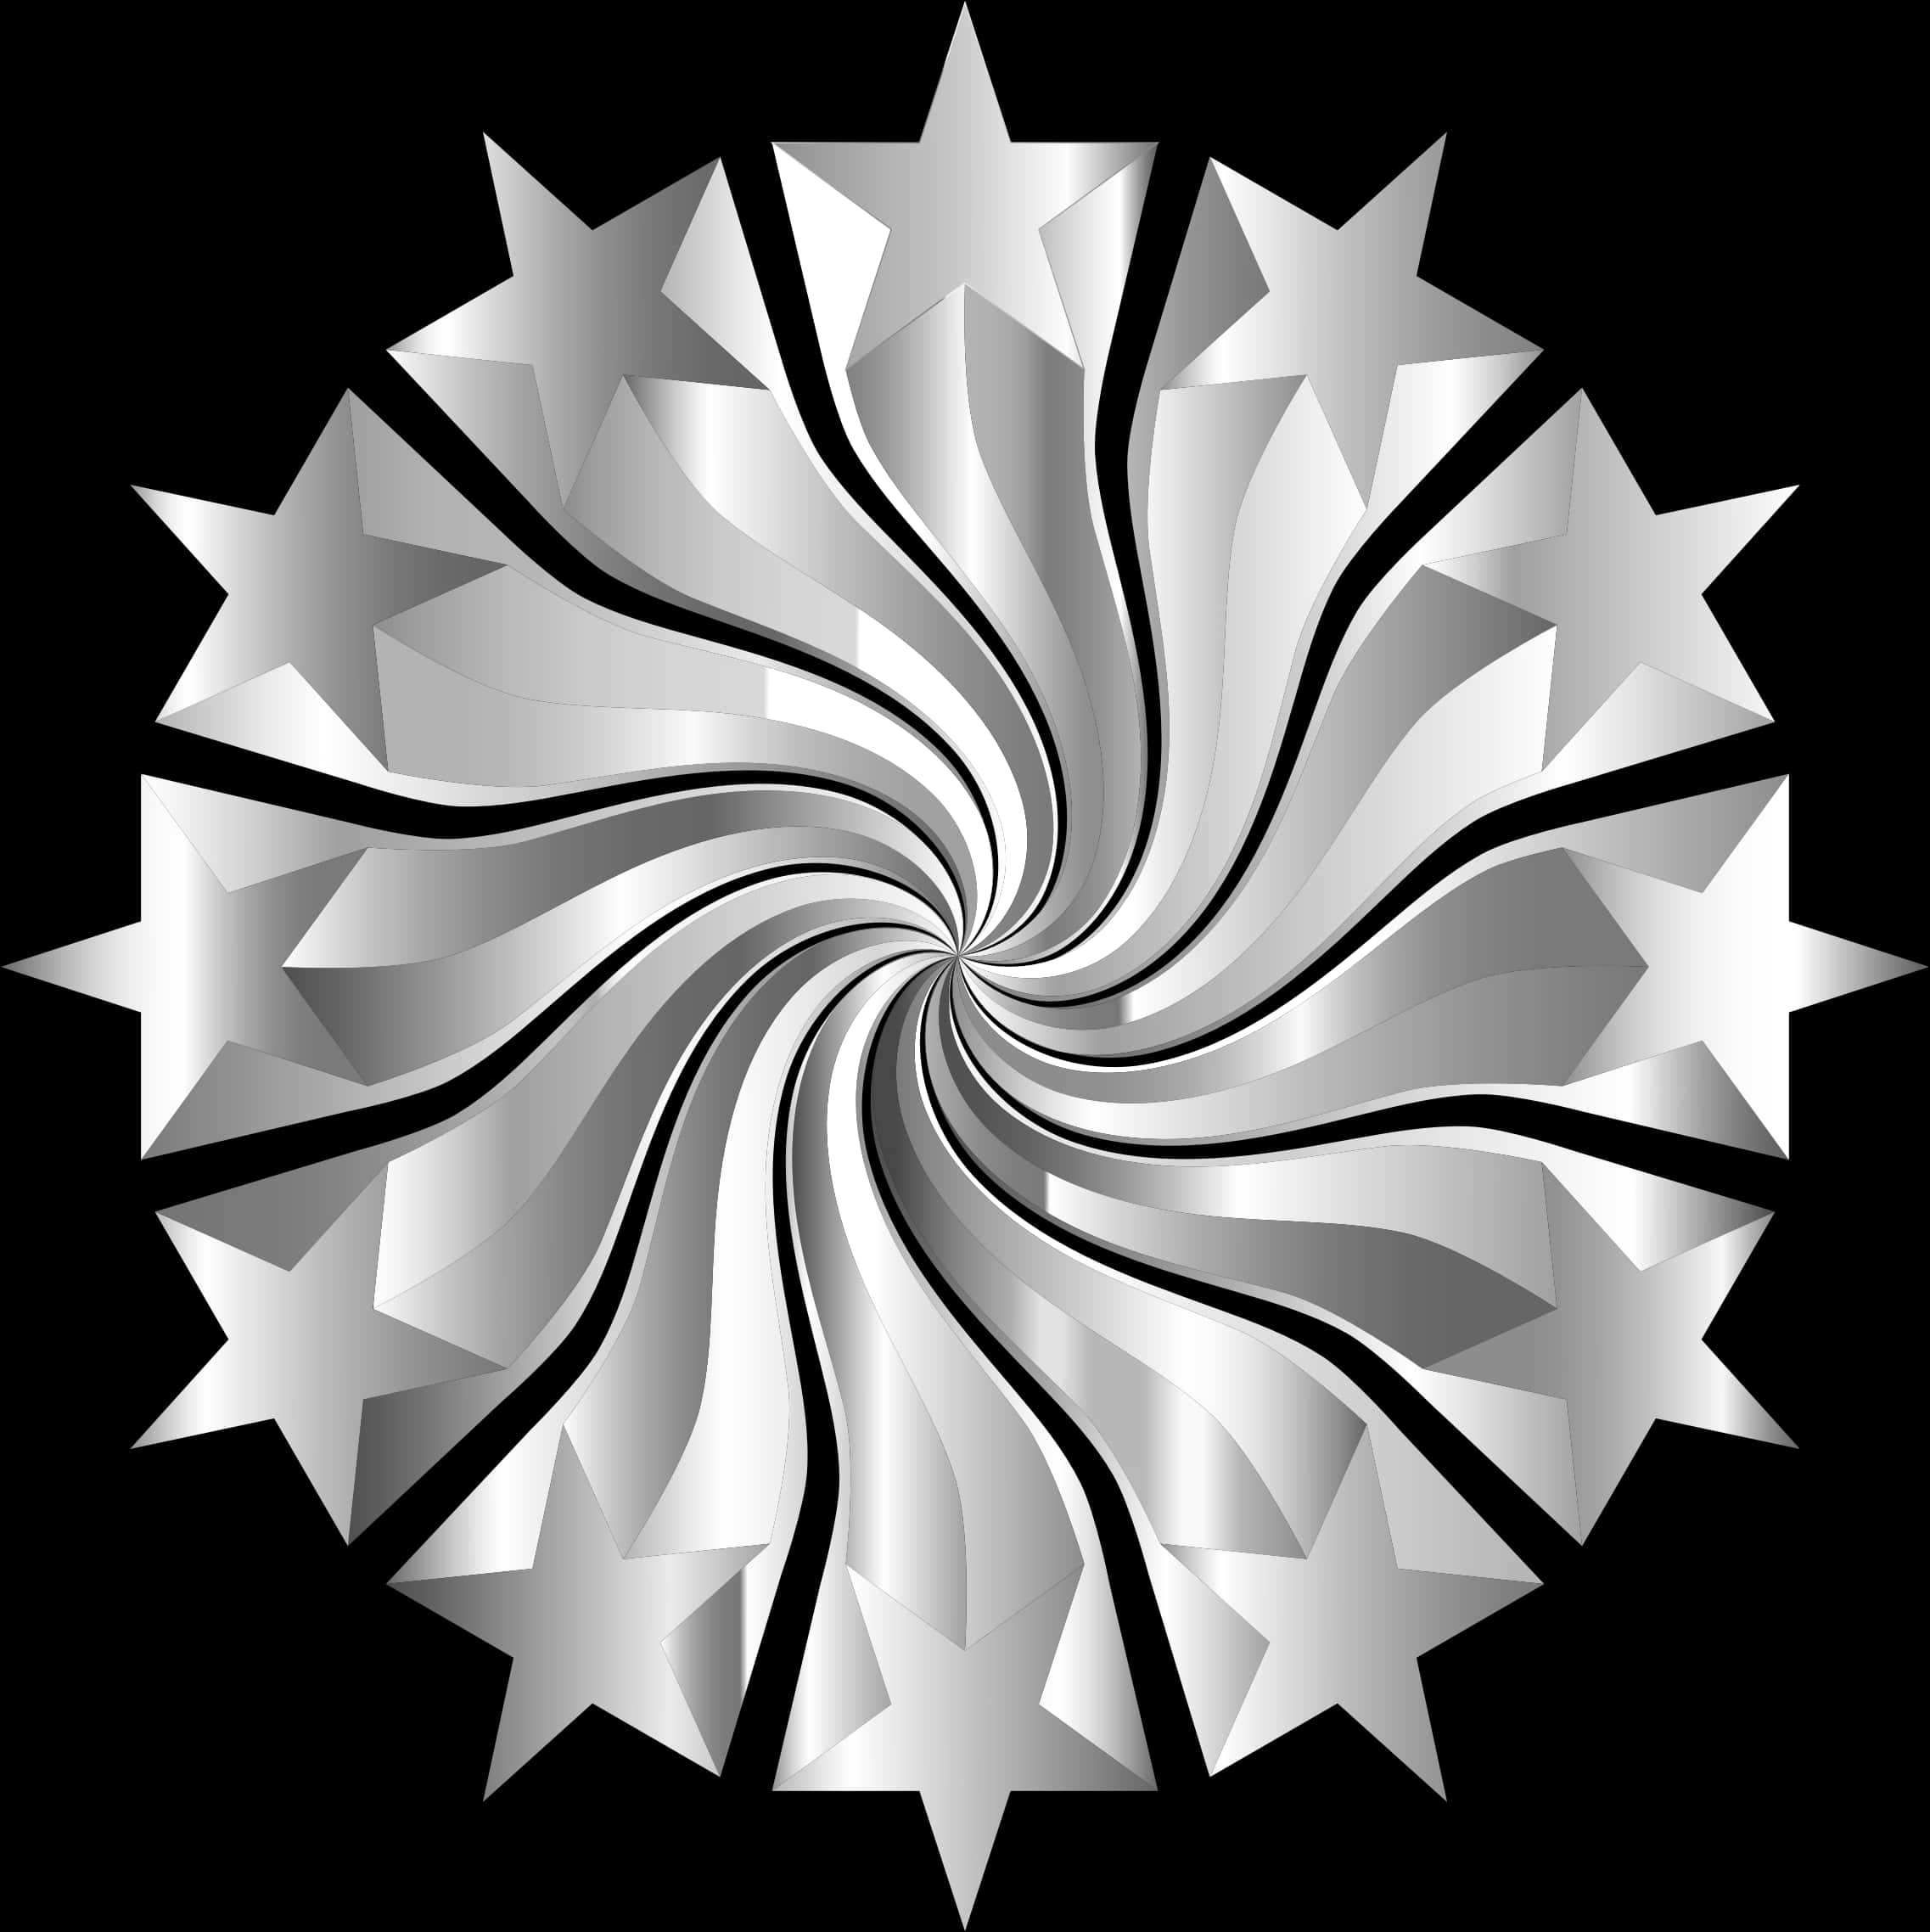 Abstract Starburst Blackand White PNG image